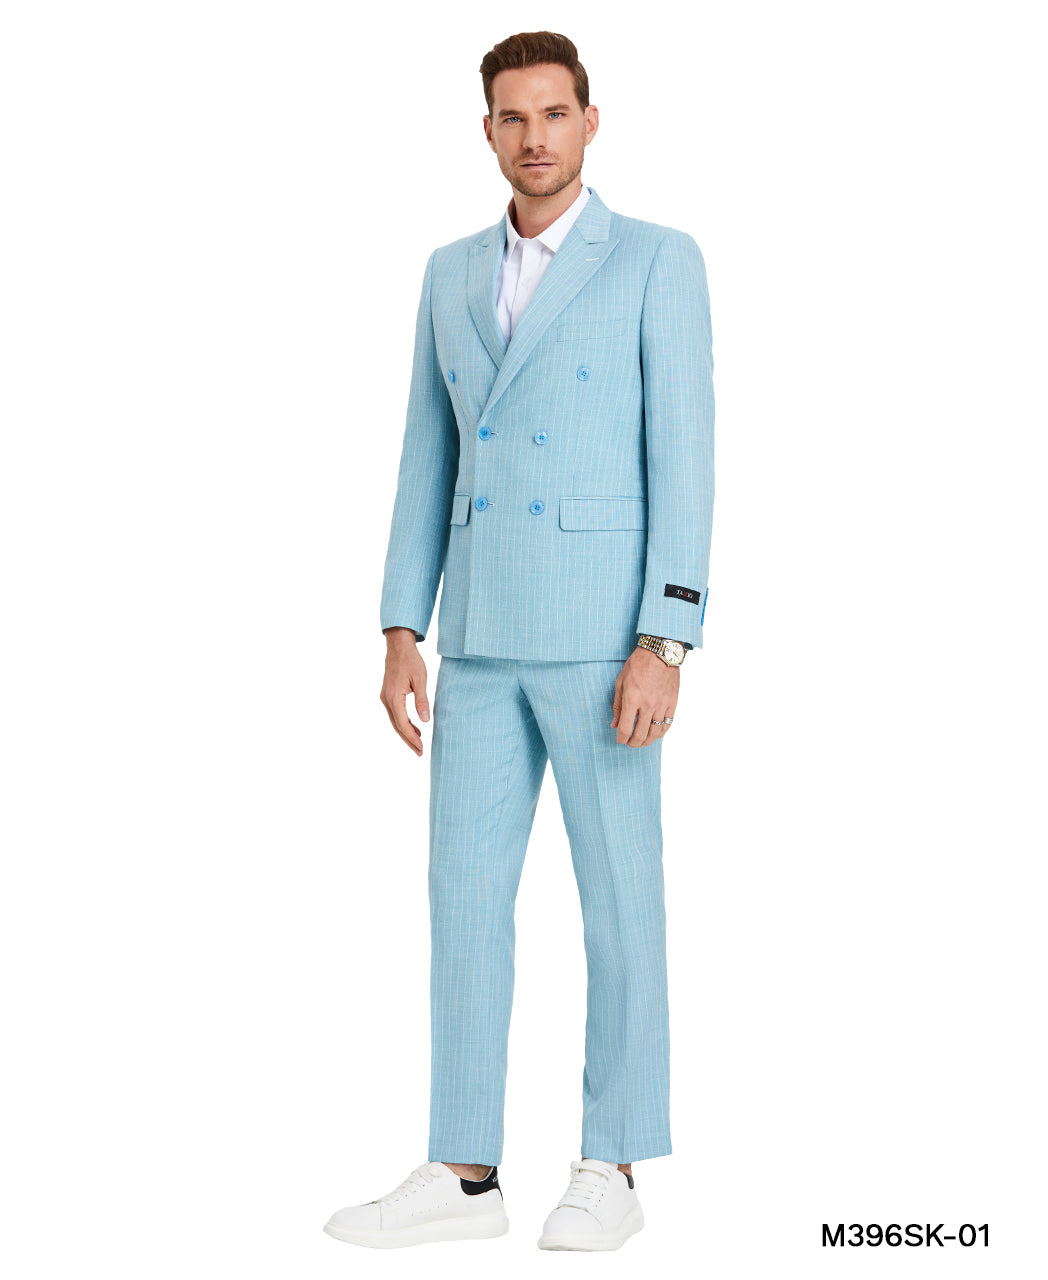 Tazio Skinny Fit Pinstripe Double-breasted Suit, Celeste